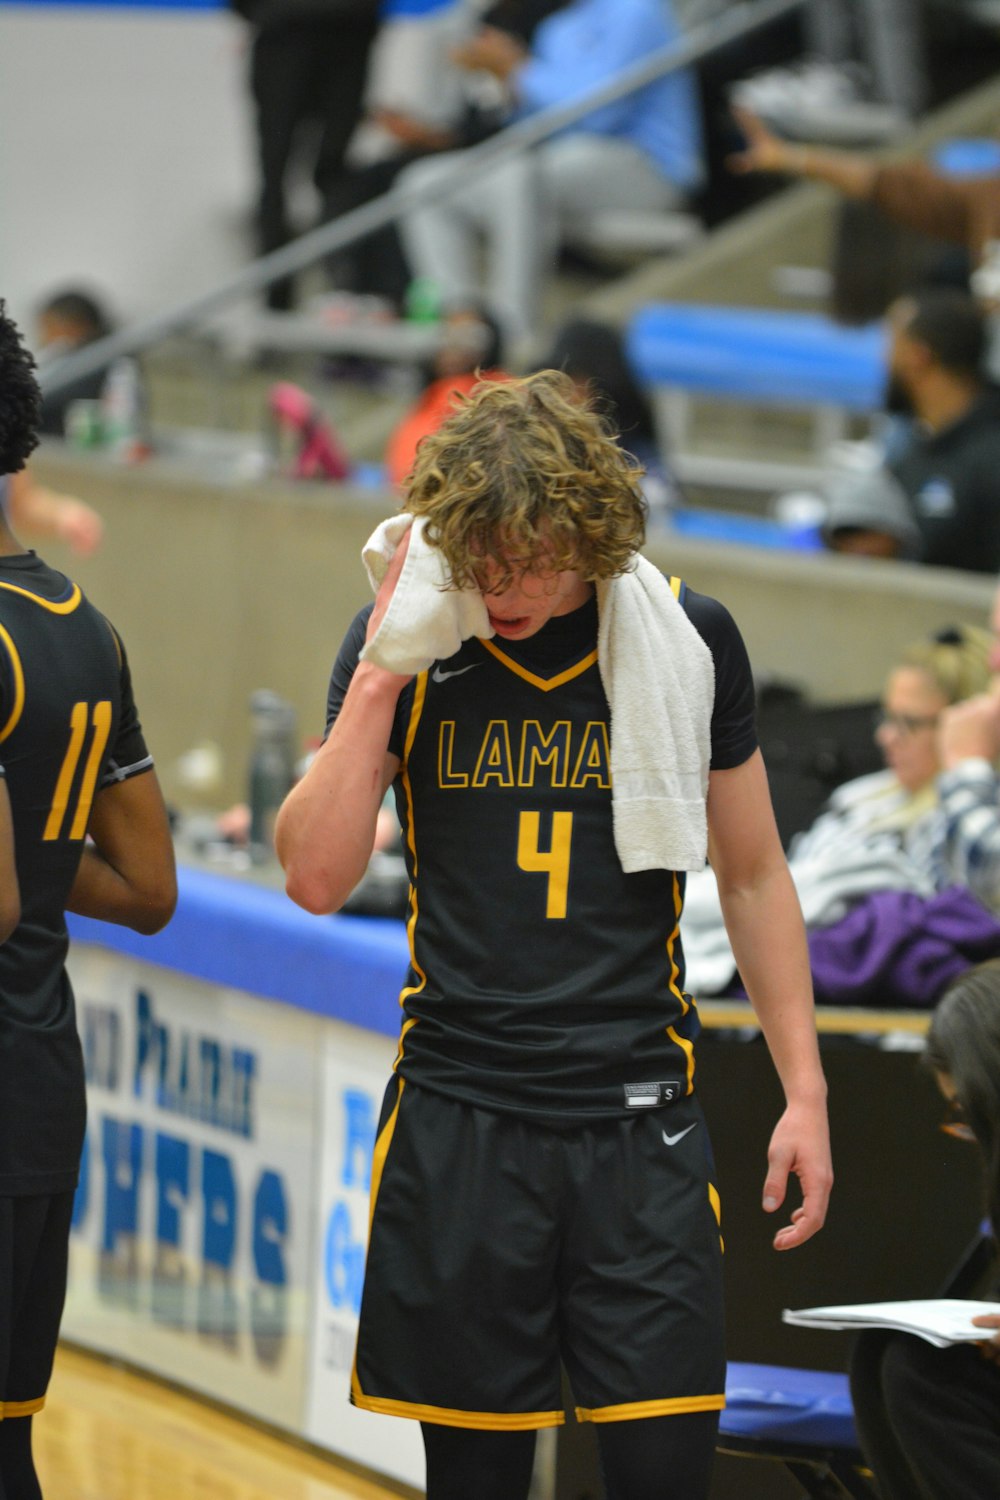 a basketball player wiping his face with a towel